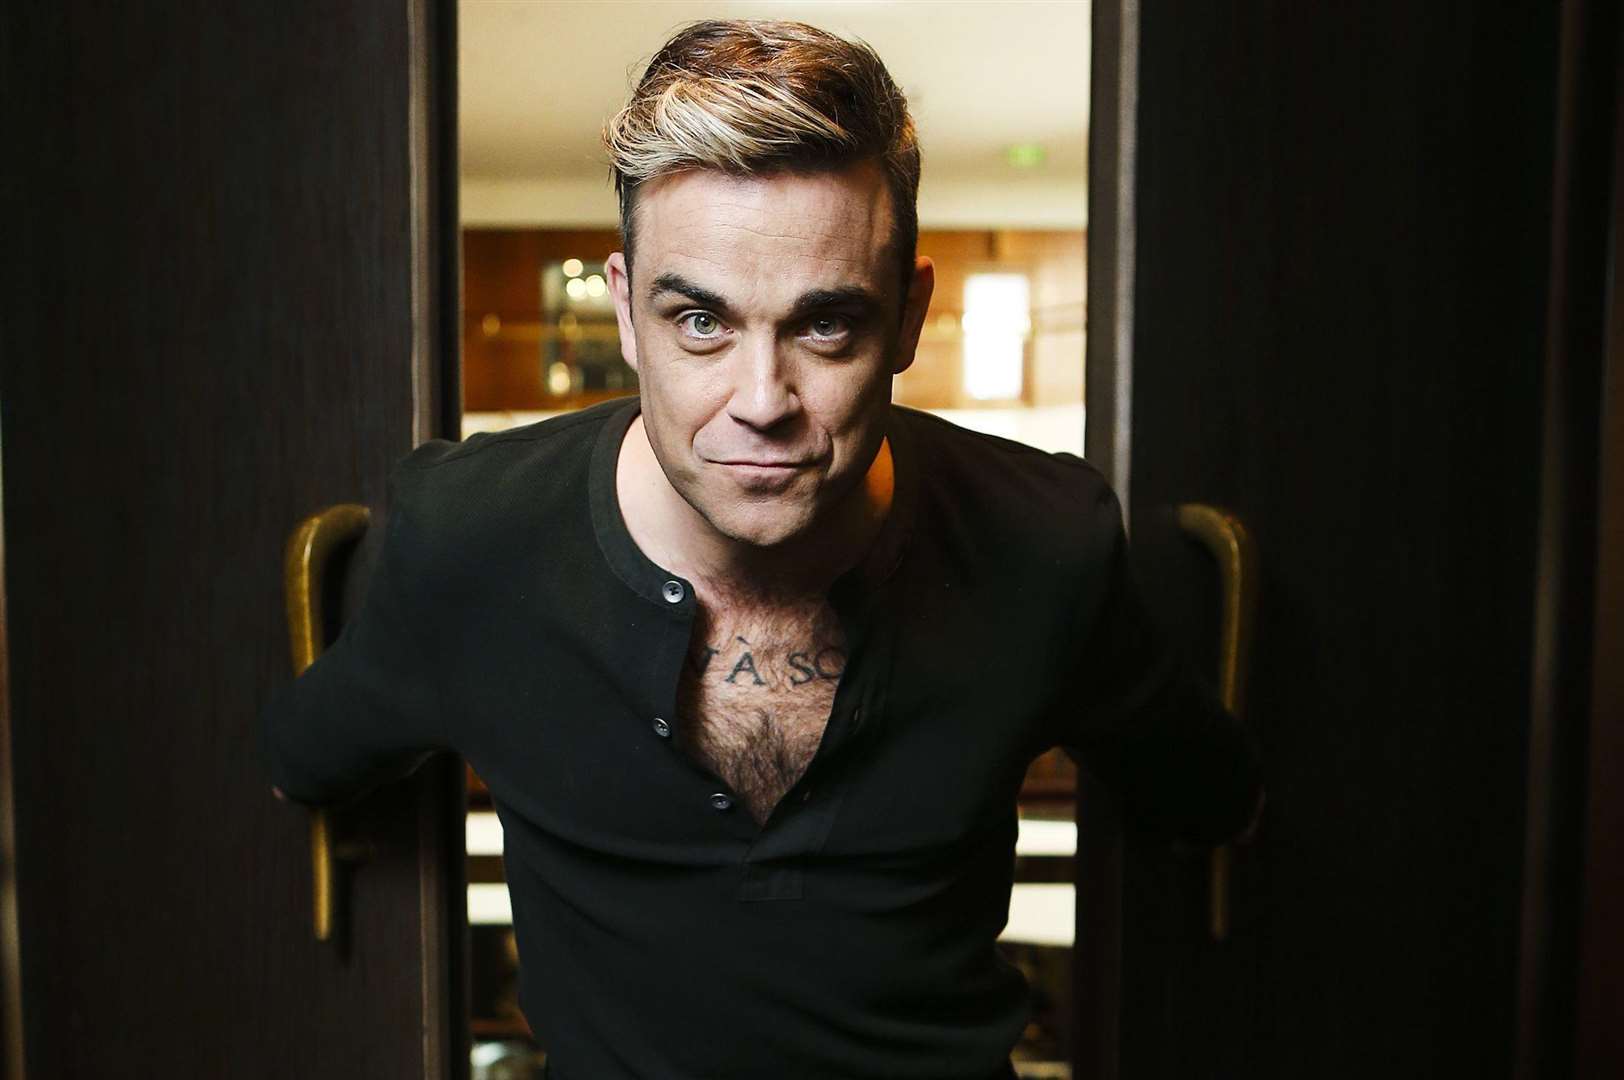 Robbie Williams is getting nostalgic over the Medway Towns